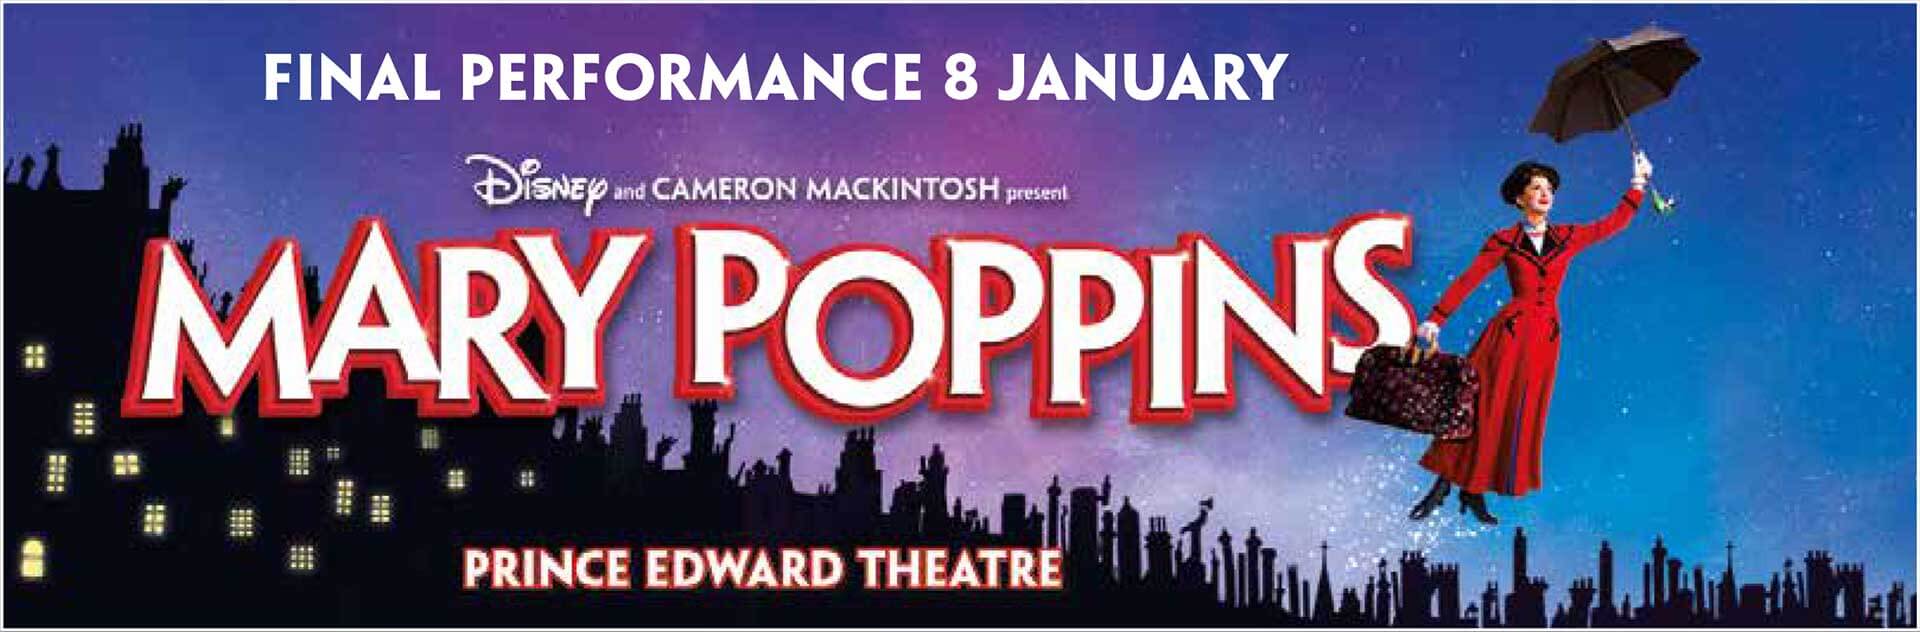 Mary Poppins at the Prince Edward Theatre